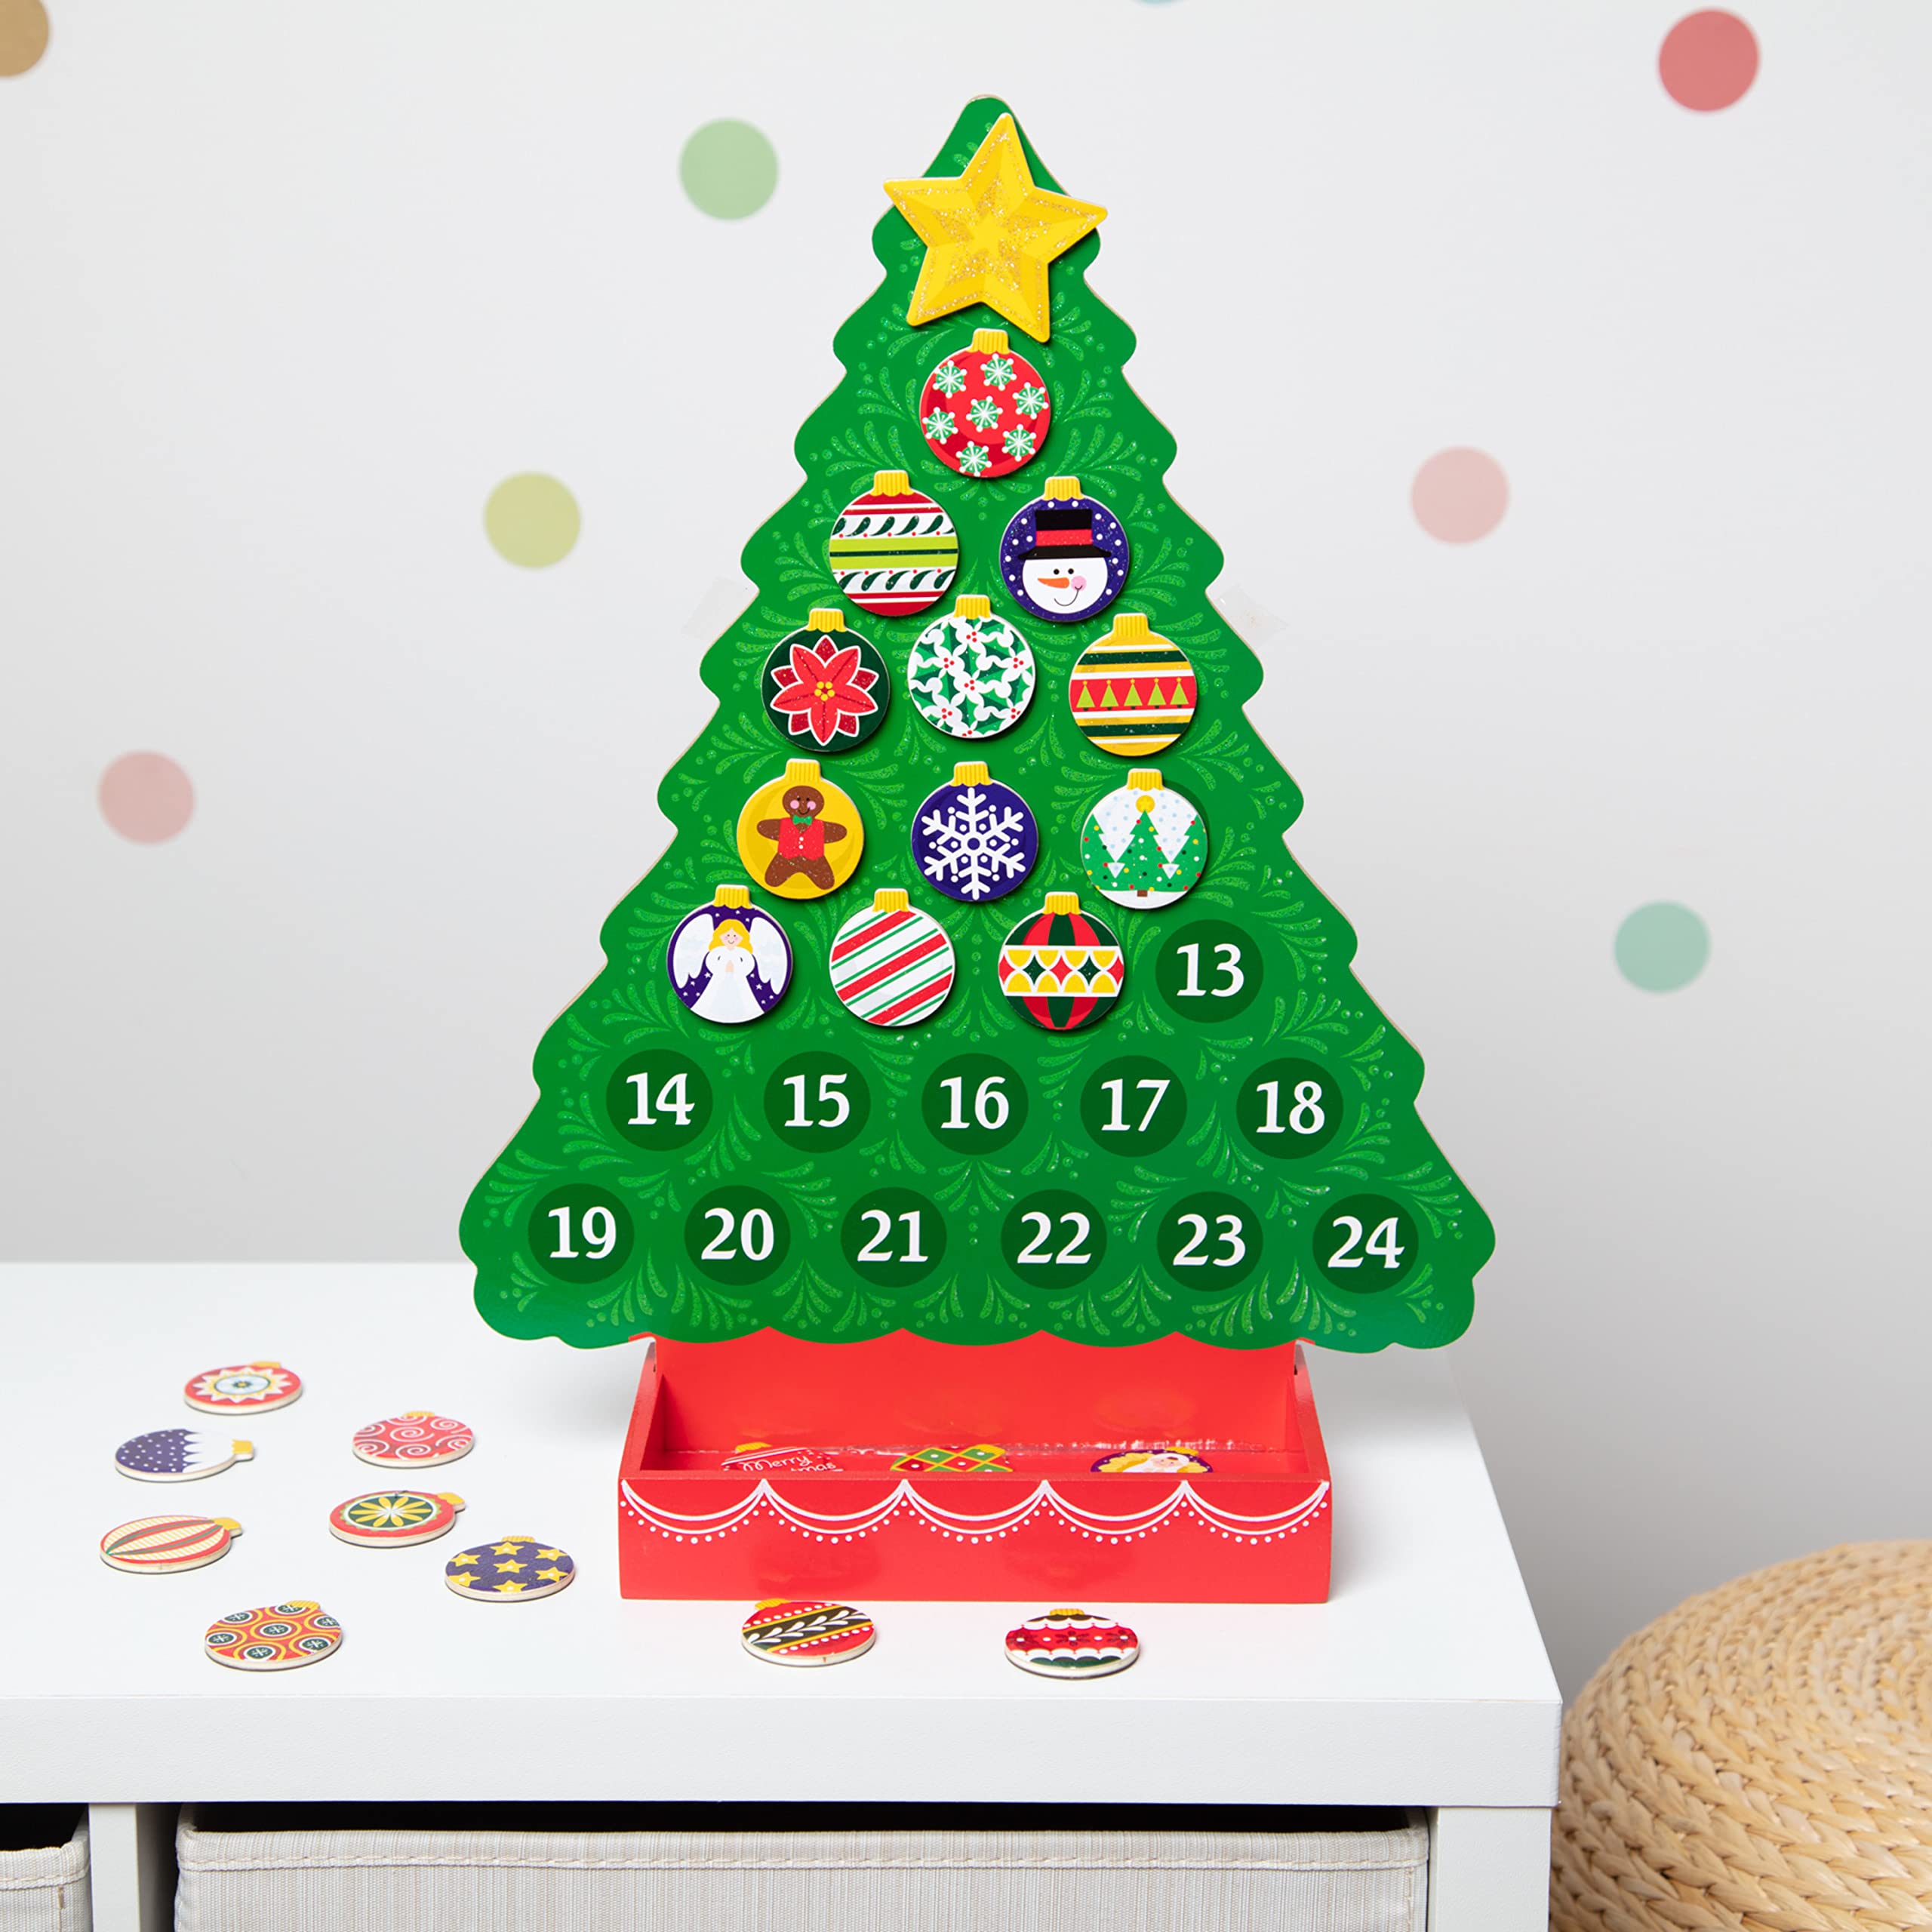 Melissa & Doug Wooden Advent Calendar - Magnetic Christmas Tree, 25 Magnets - Holiday Tree Themed Countdown Style Toddler and Kid Advent Calendar 2022 For Ages 3+